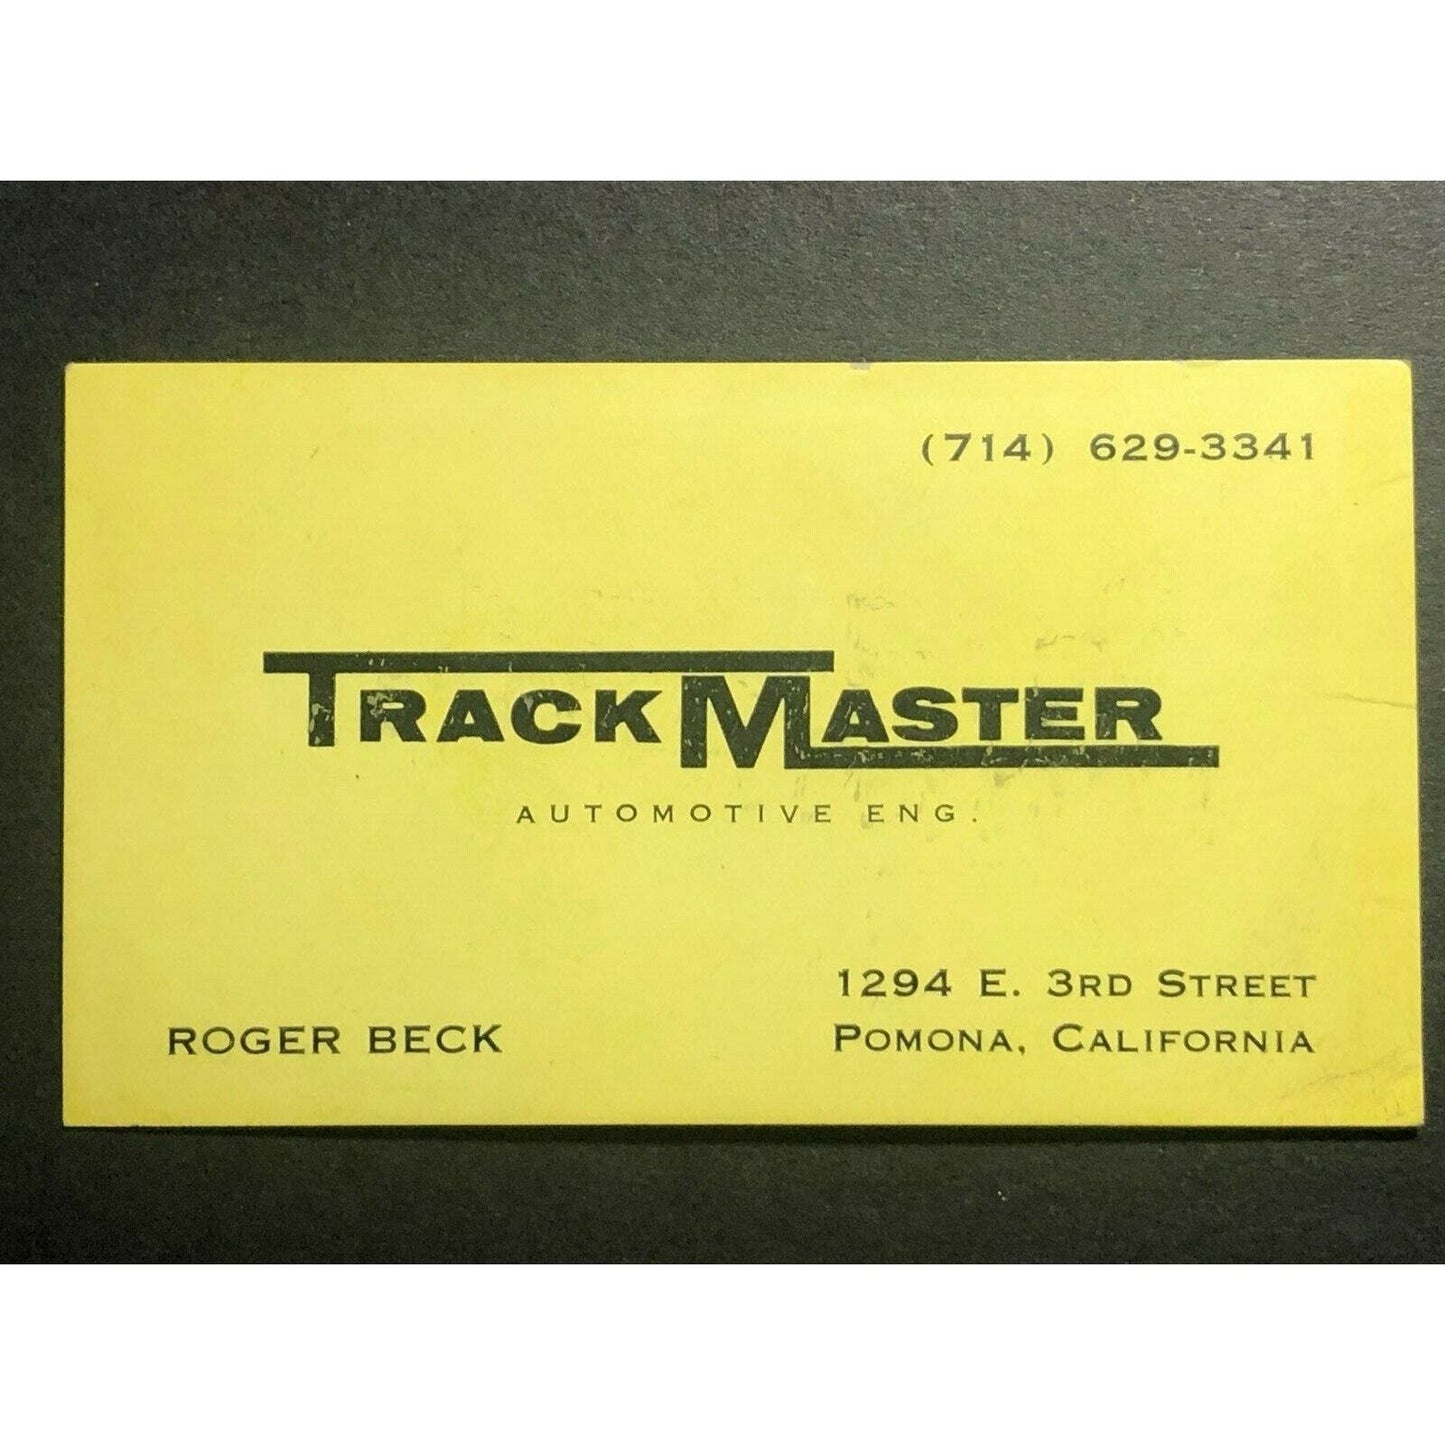 c1970's Buss. Card Track Mater Automotive Eng. Pomona, CA Roger Beck